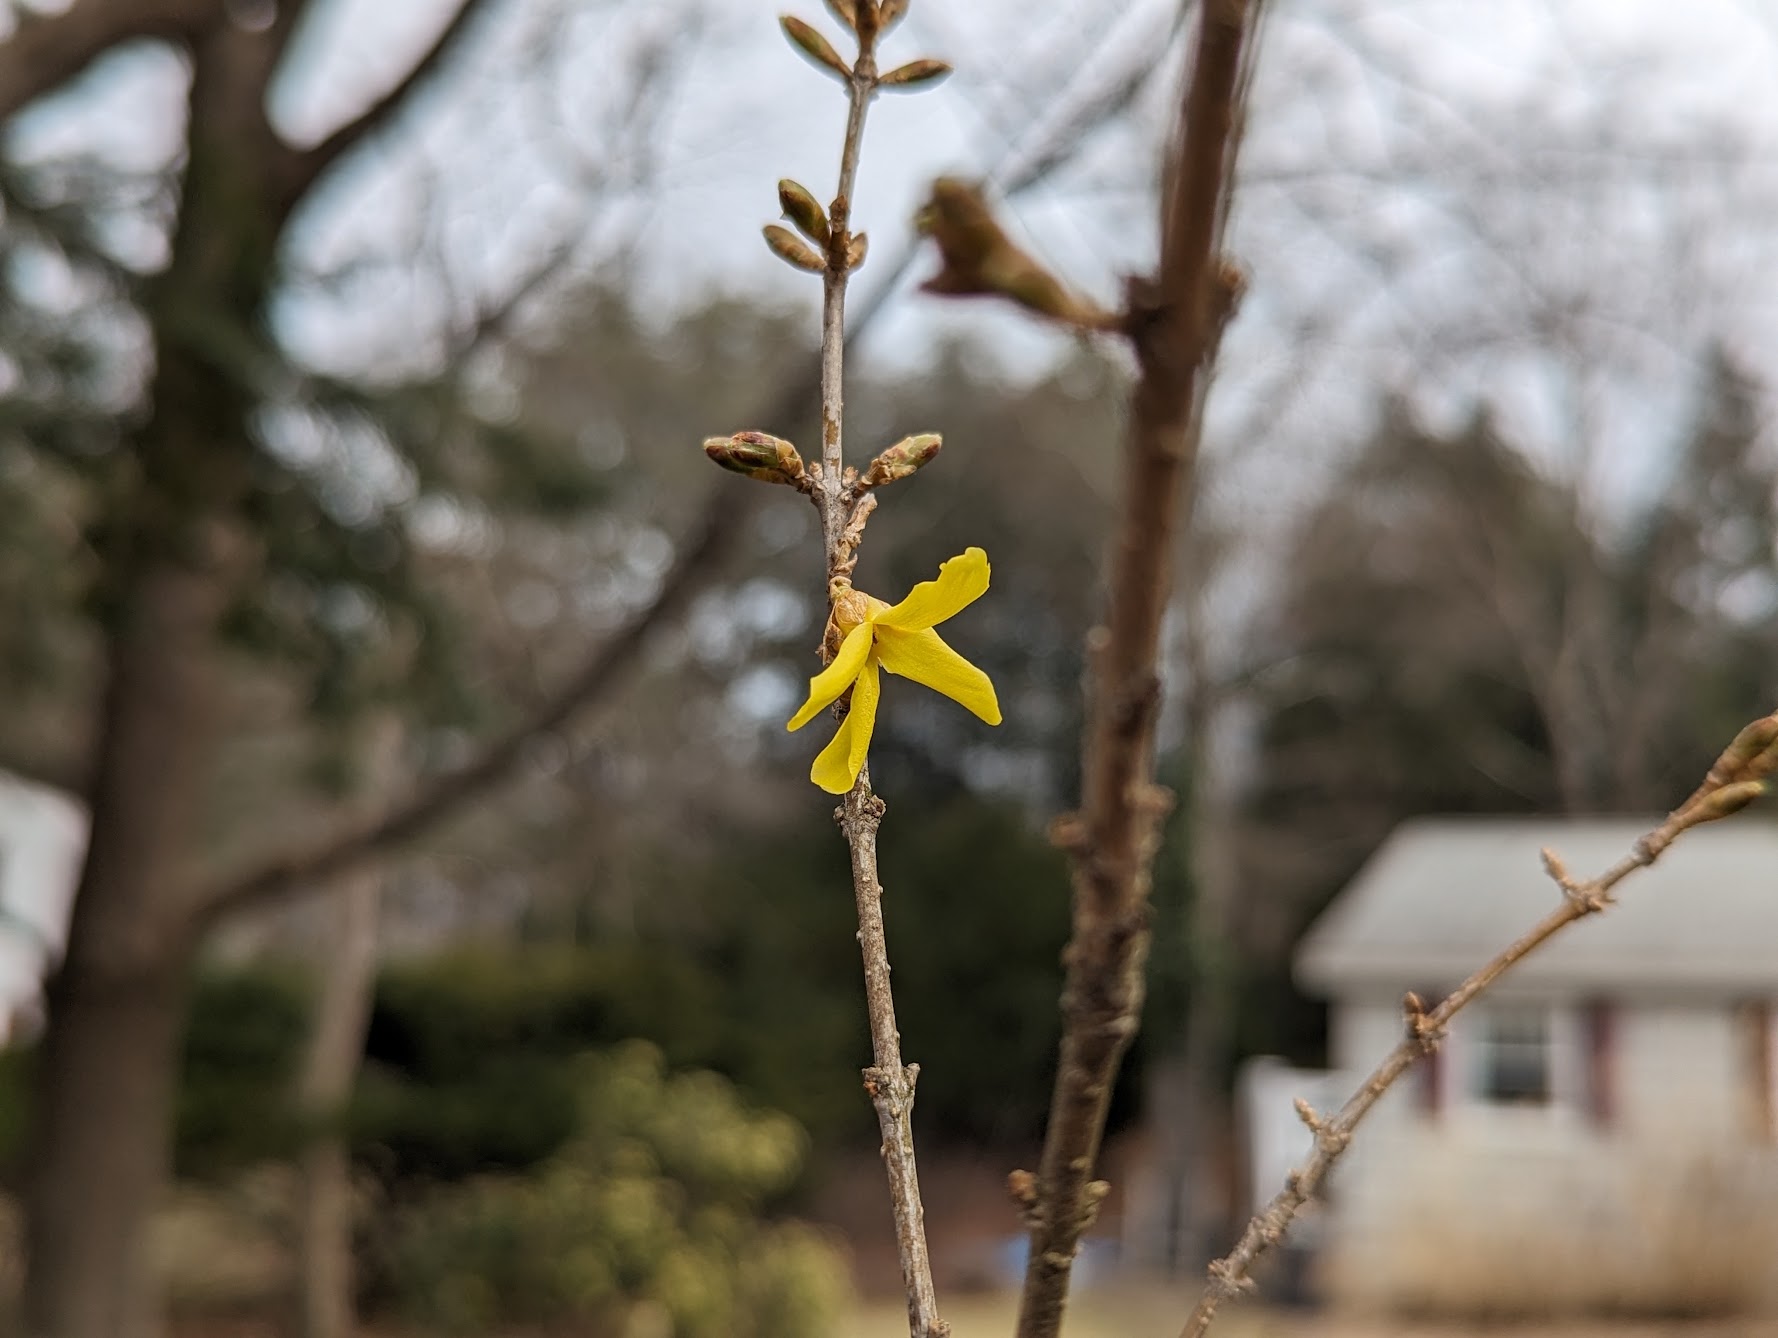 The first forsythia